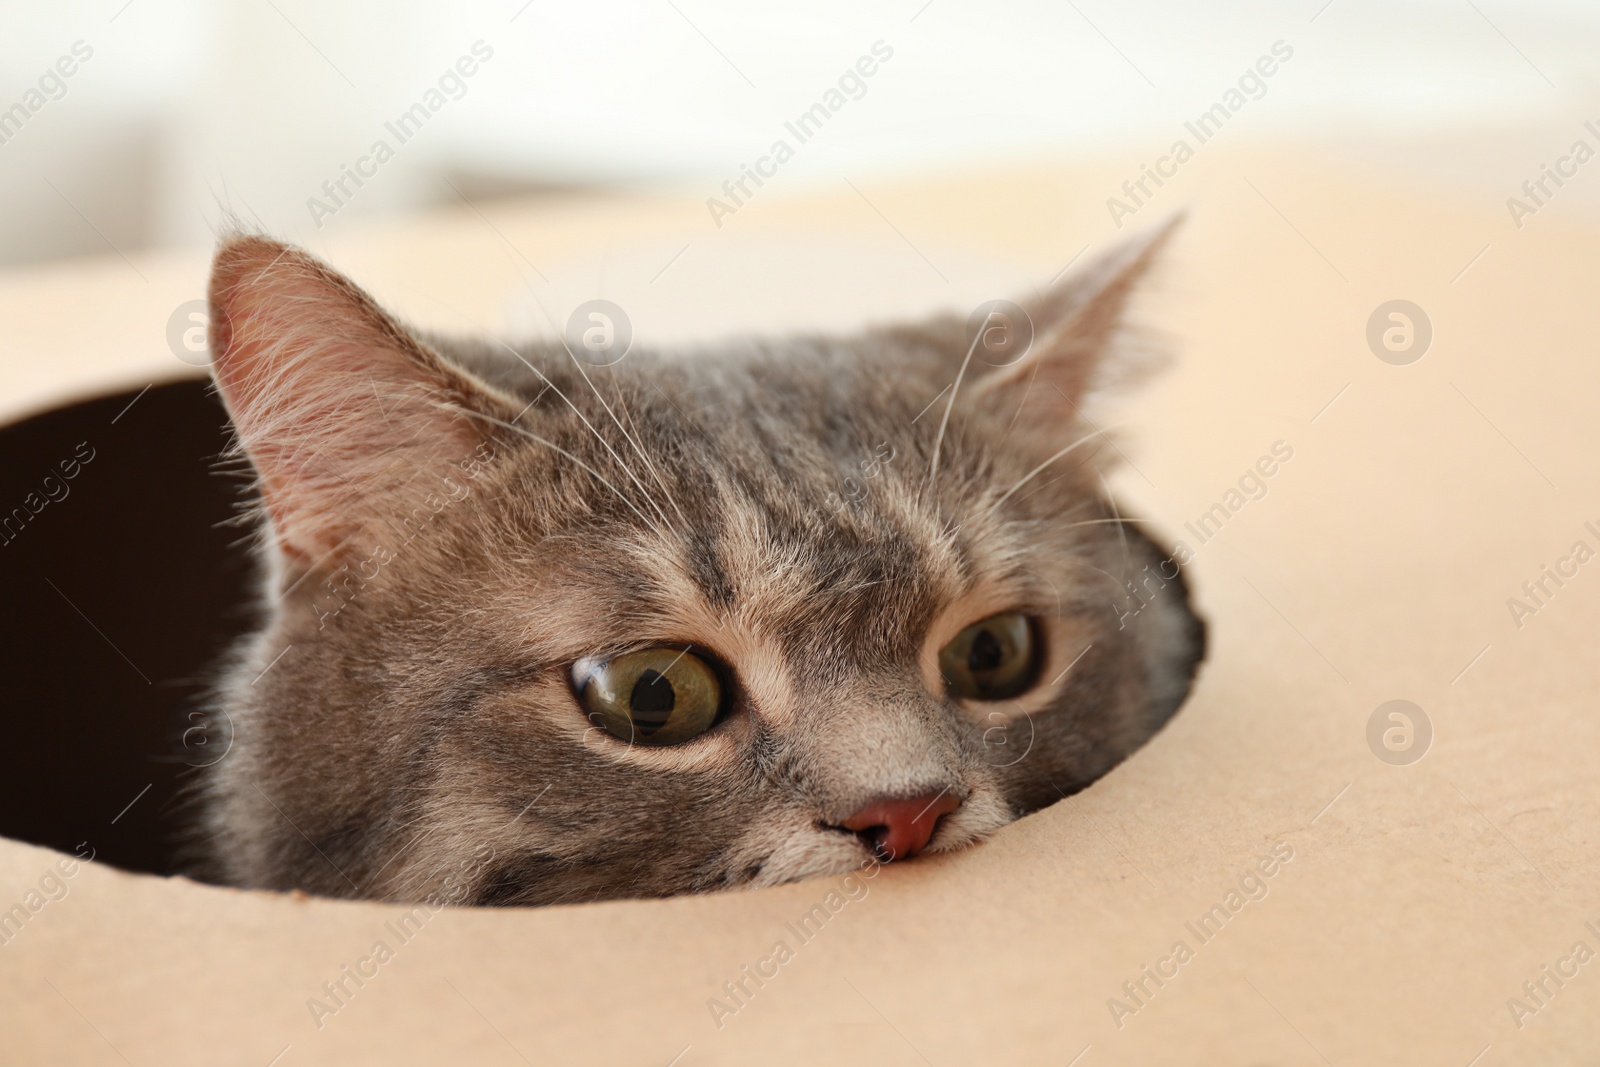 Photo of Cute grey tabby cat looking out of cardboard box at home, closeup